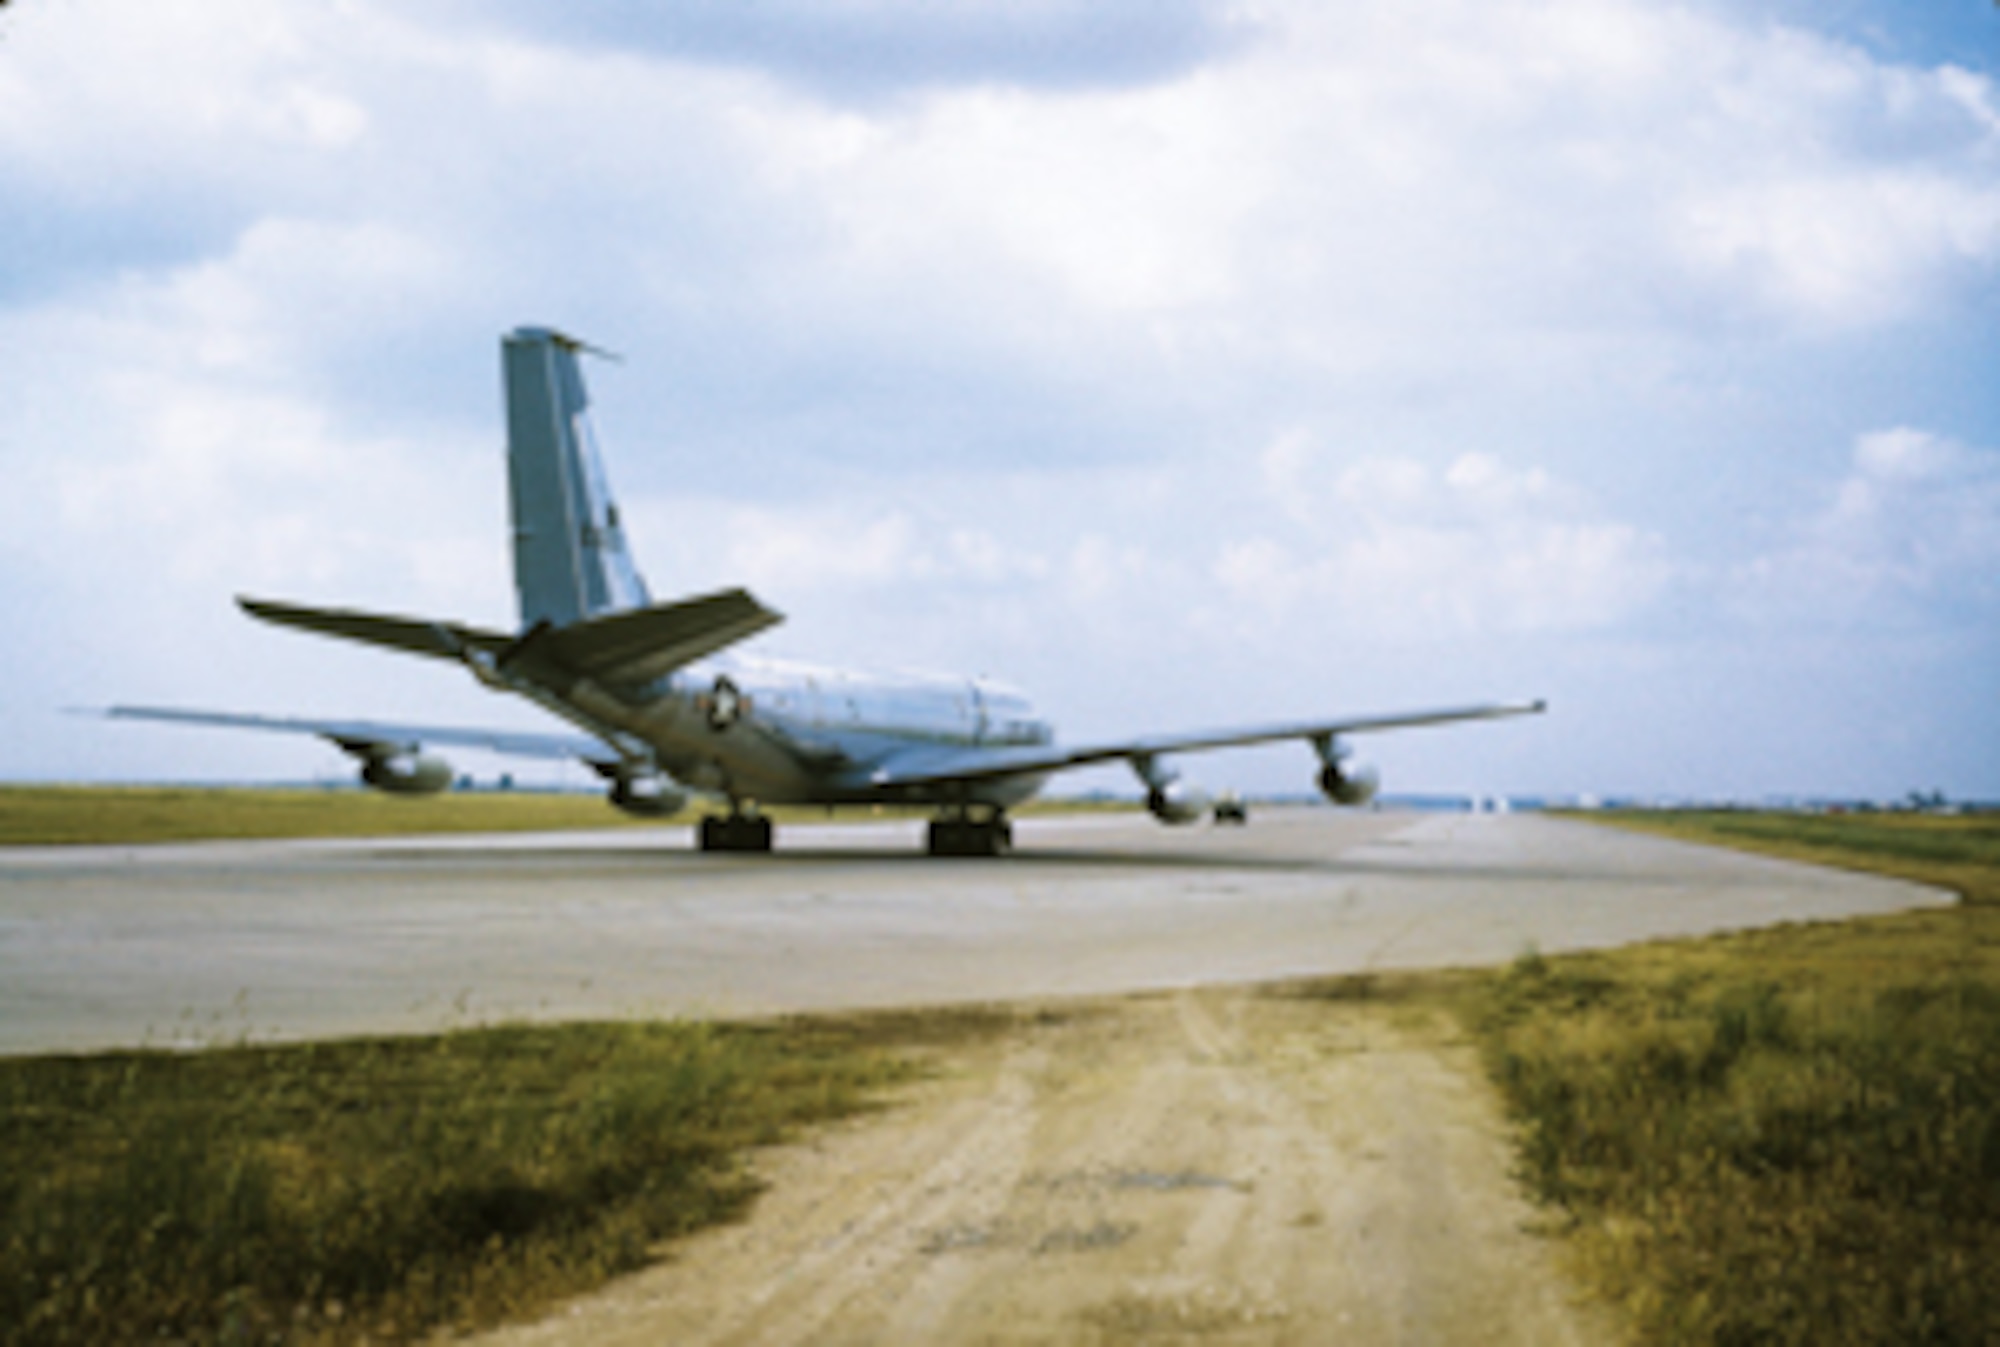 A KC-135 Stratotanker rests on the ramp at Moron Air Base, Spain during Operation CHROME DOME. B-52 Stratofortresses flew routes near the Soviet Union border and were refueled by KC-135 Stratotankers to keep them on constant airborne alert. (Courtesy Photo)